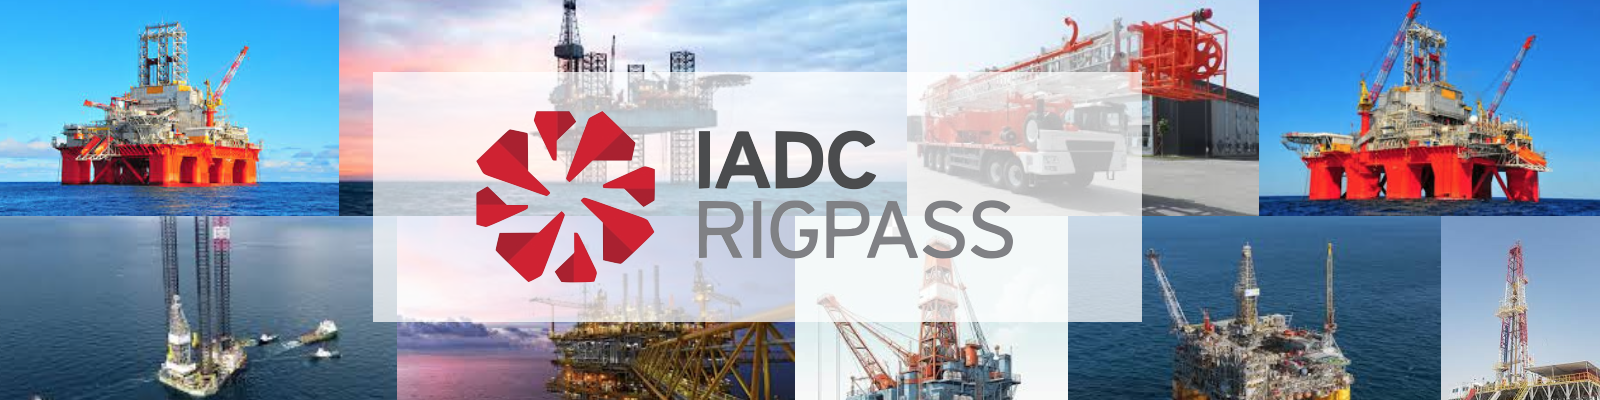 Enhancing Safety in Offshore operations: IADC Accredited RigPass Training at Elite Offshore Pvt Ltd